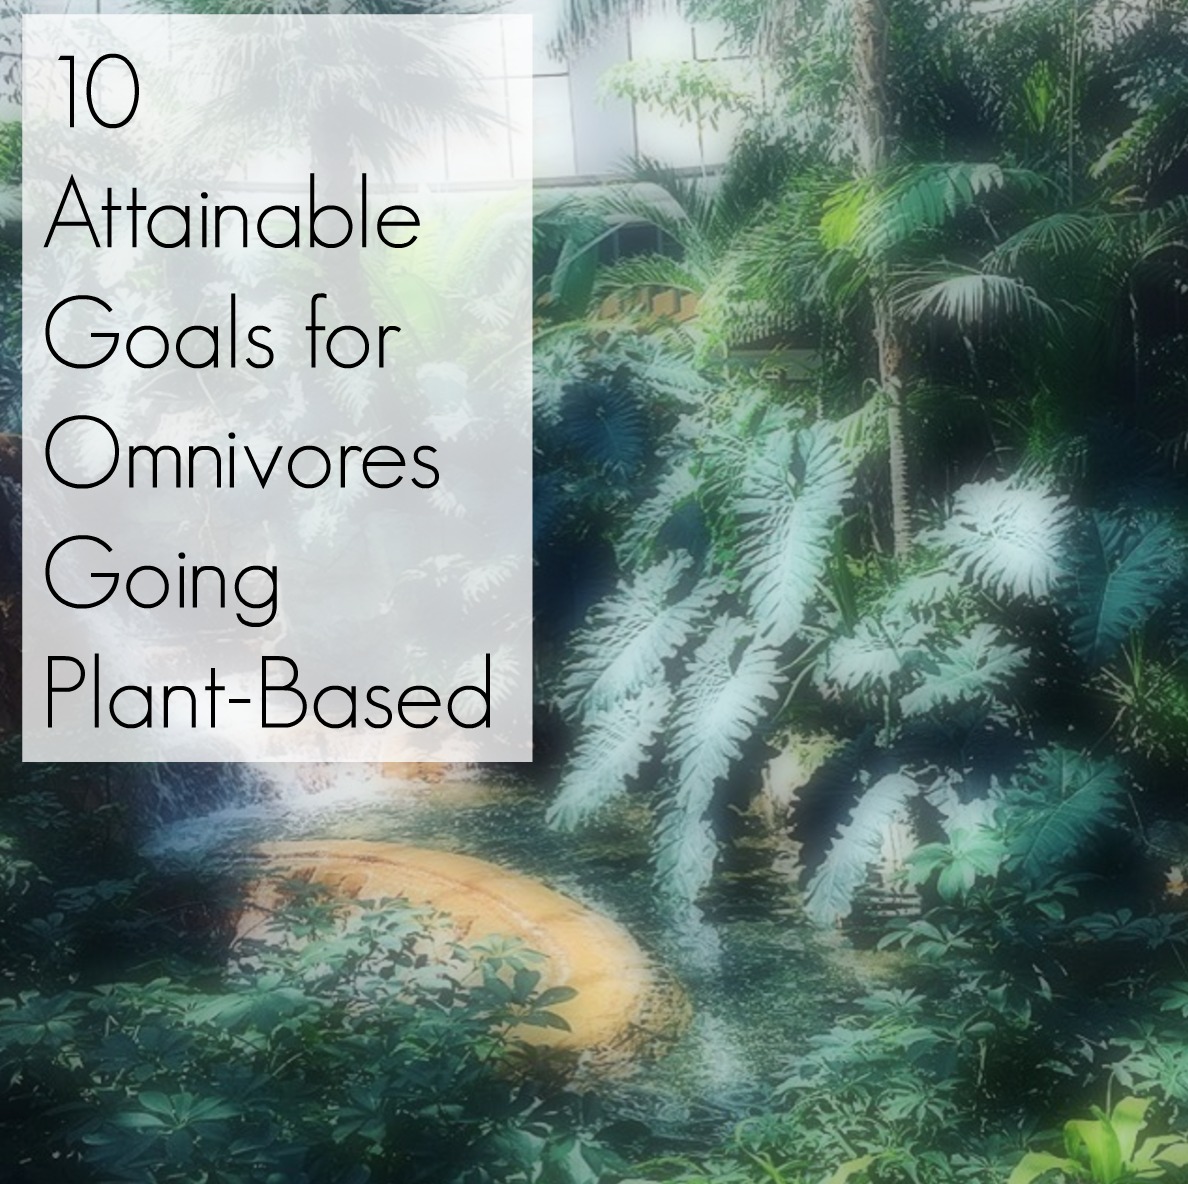 10 Attainable Goals for Omnivores Going Plant-Based